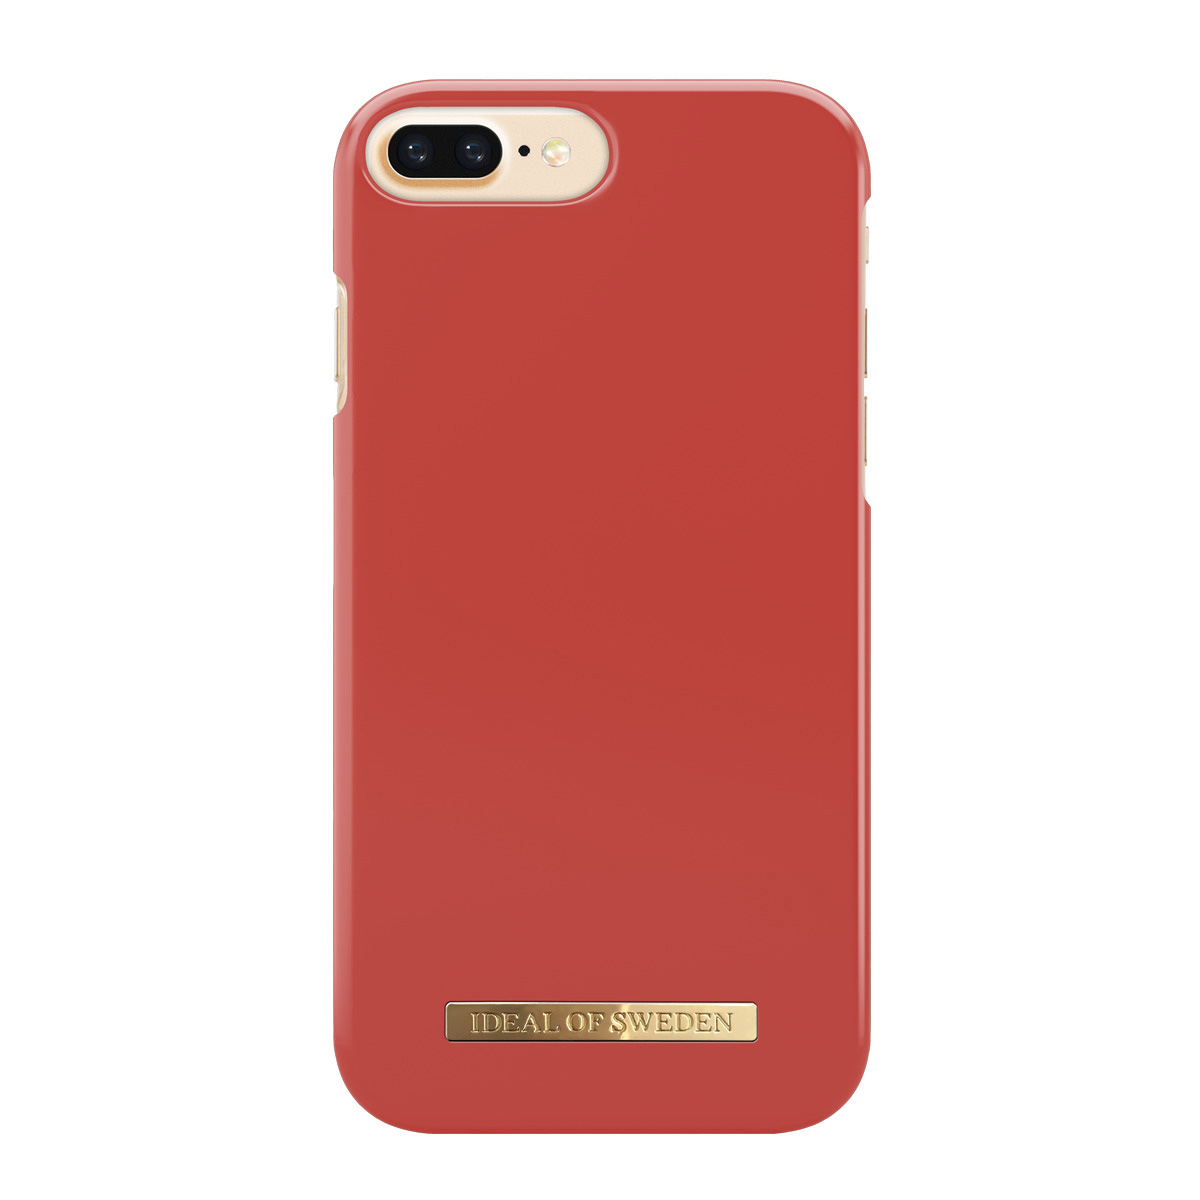 iPhone 7 8 IDEAL Plus, iPhone Aurora Plus Fashion, Red Plus, SWEDEN 6 ,iPhone Apple, OF Backcover,